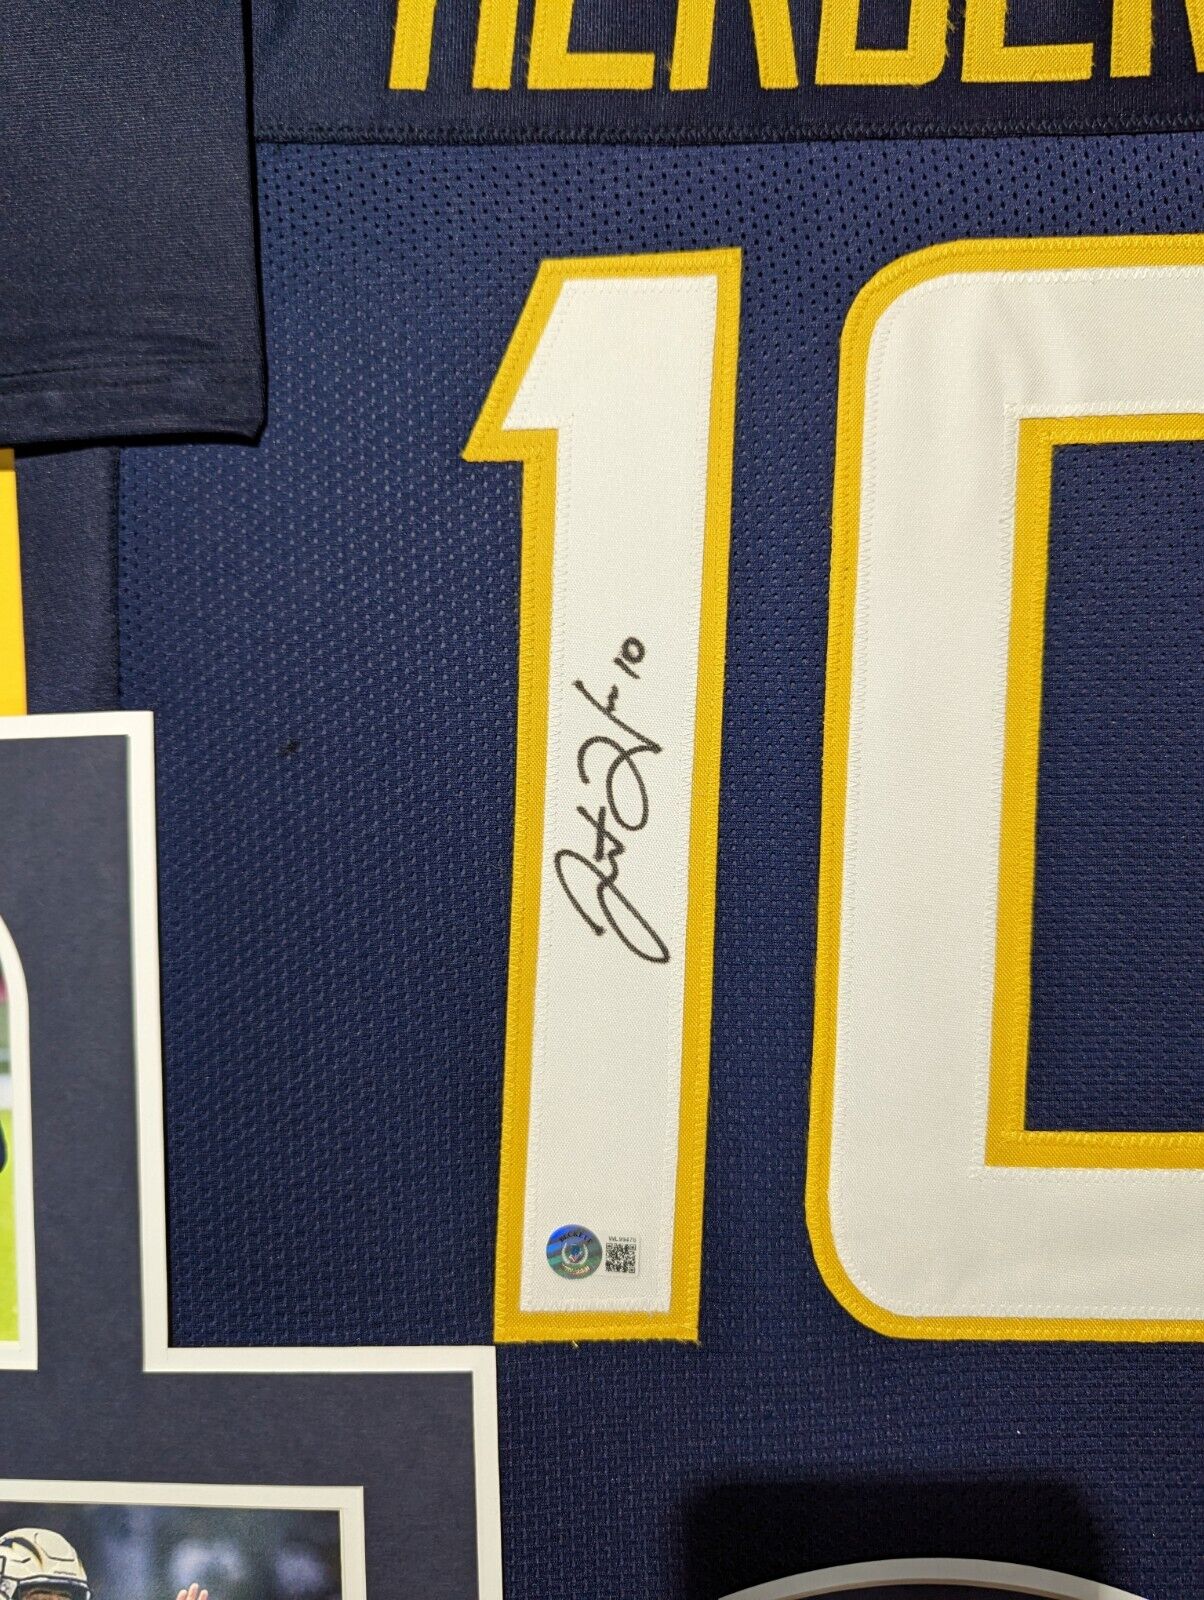 Justin Herbert Loas Angeles Chargers Jersey IMPACT Frame